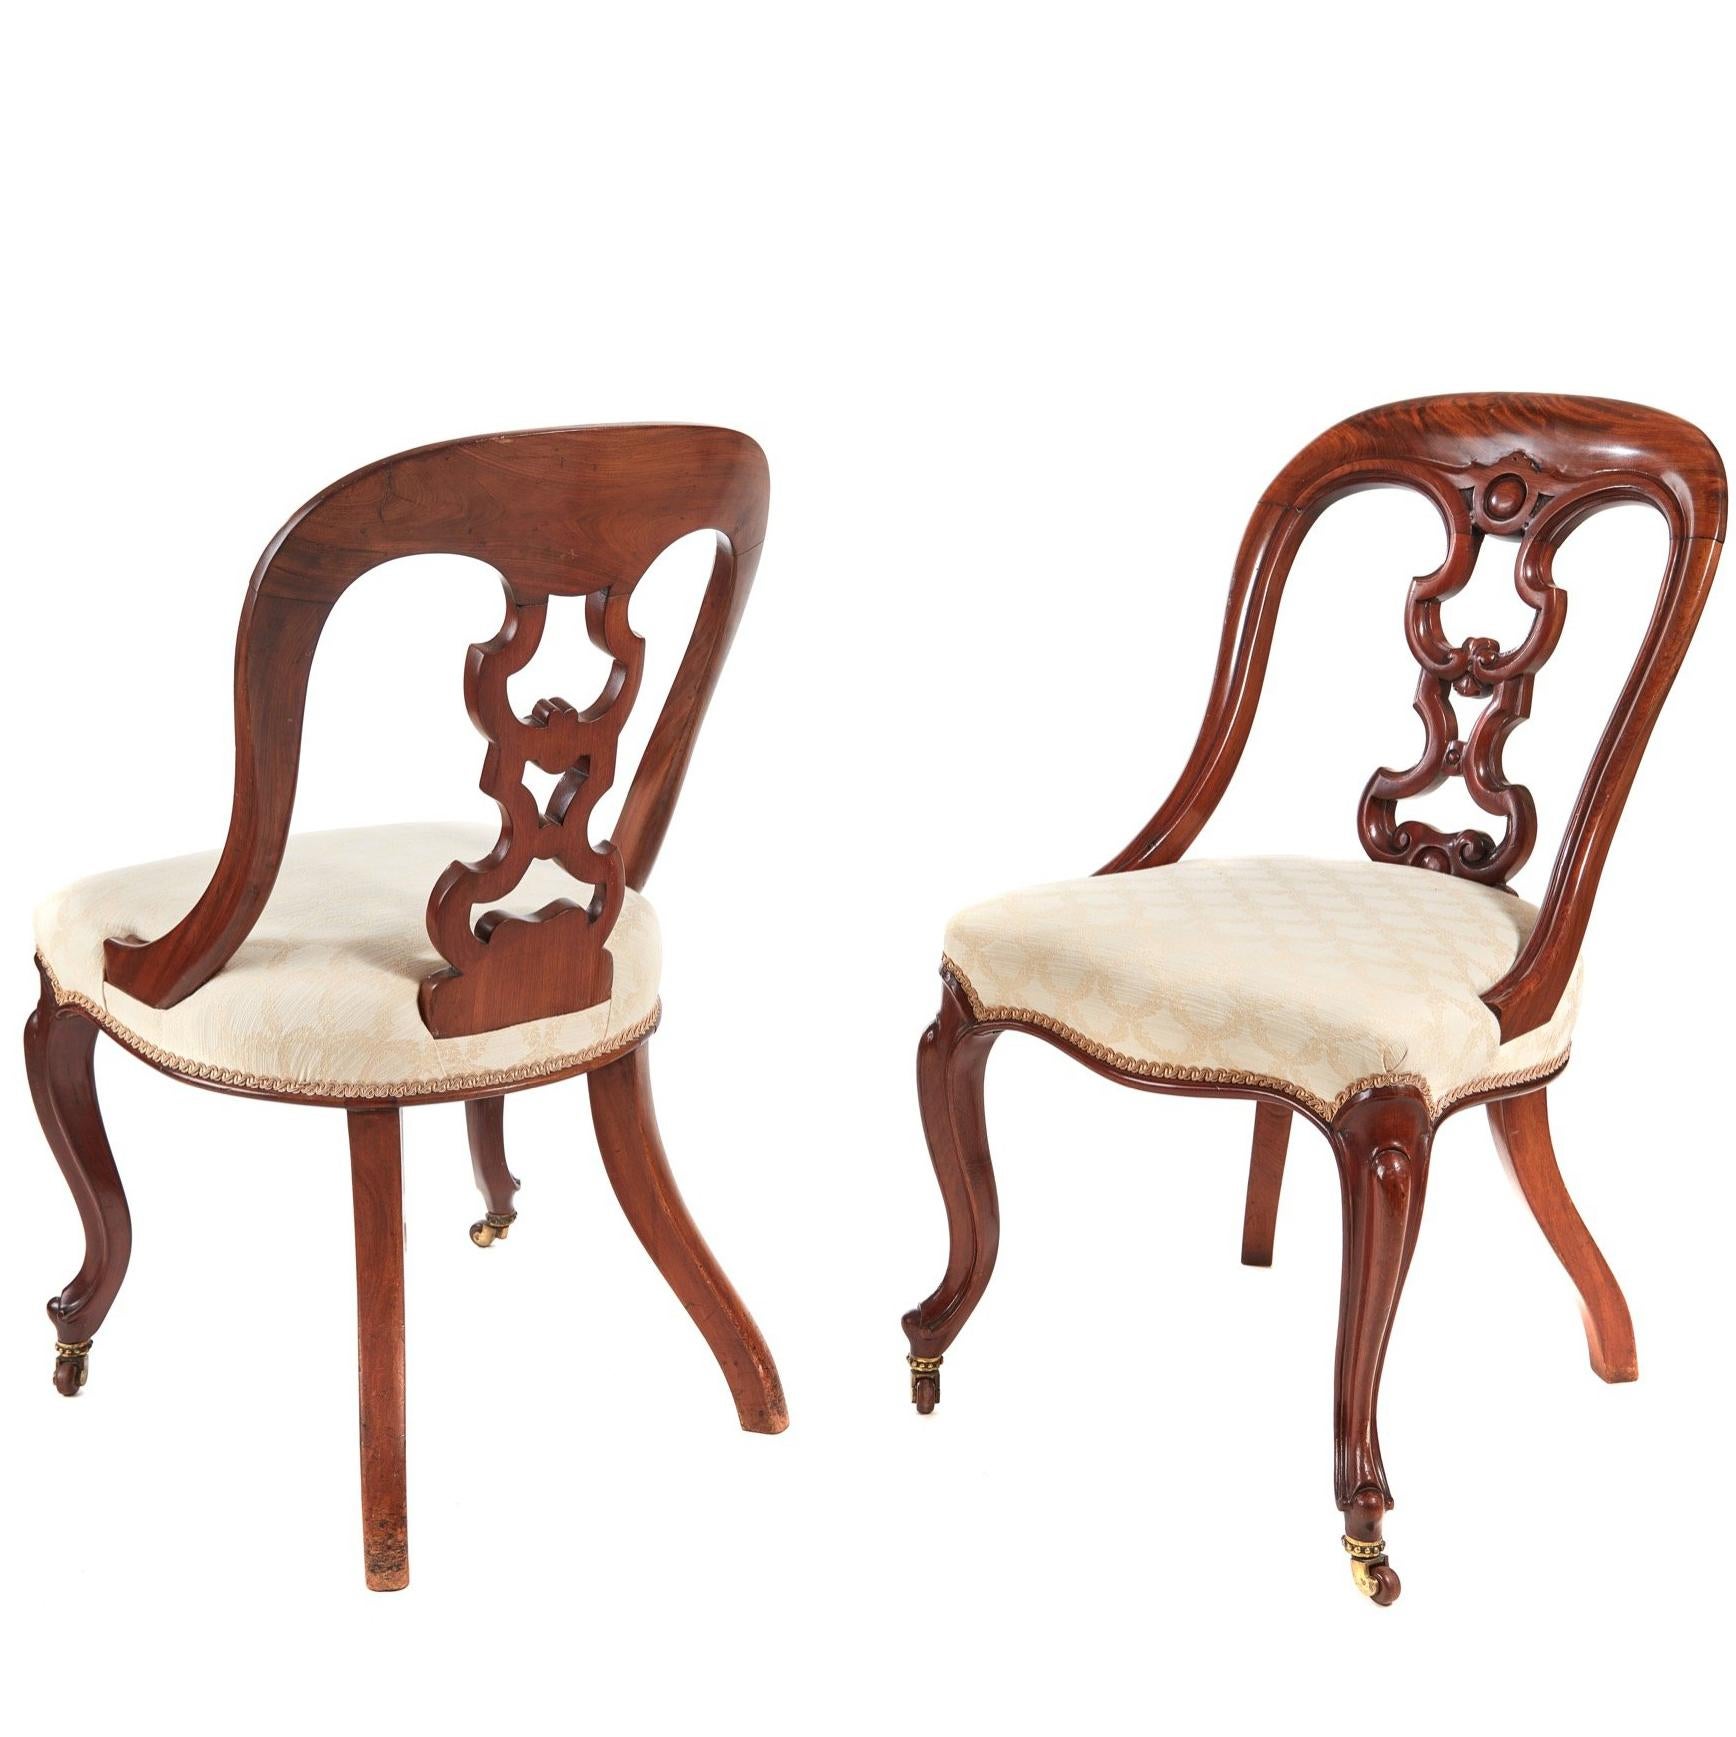 Fantastic Quality Pair of Victorian Mahogany Desk Chairs For Sale